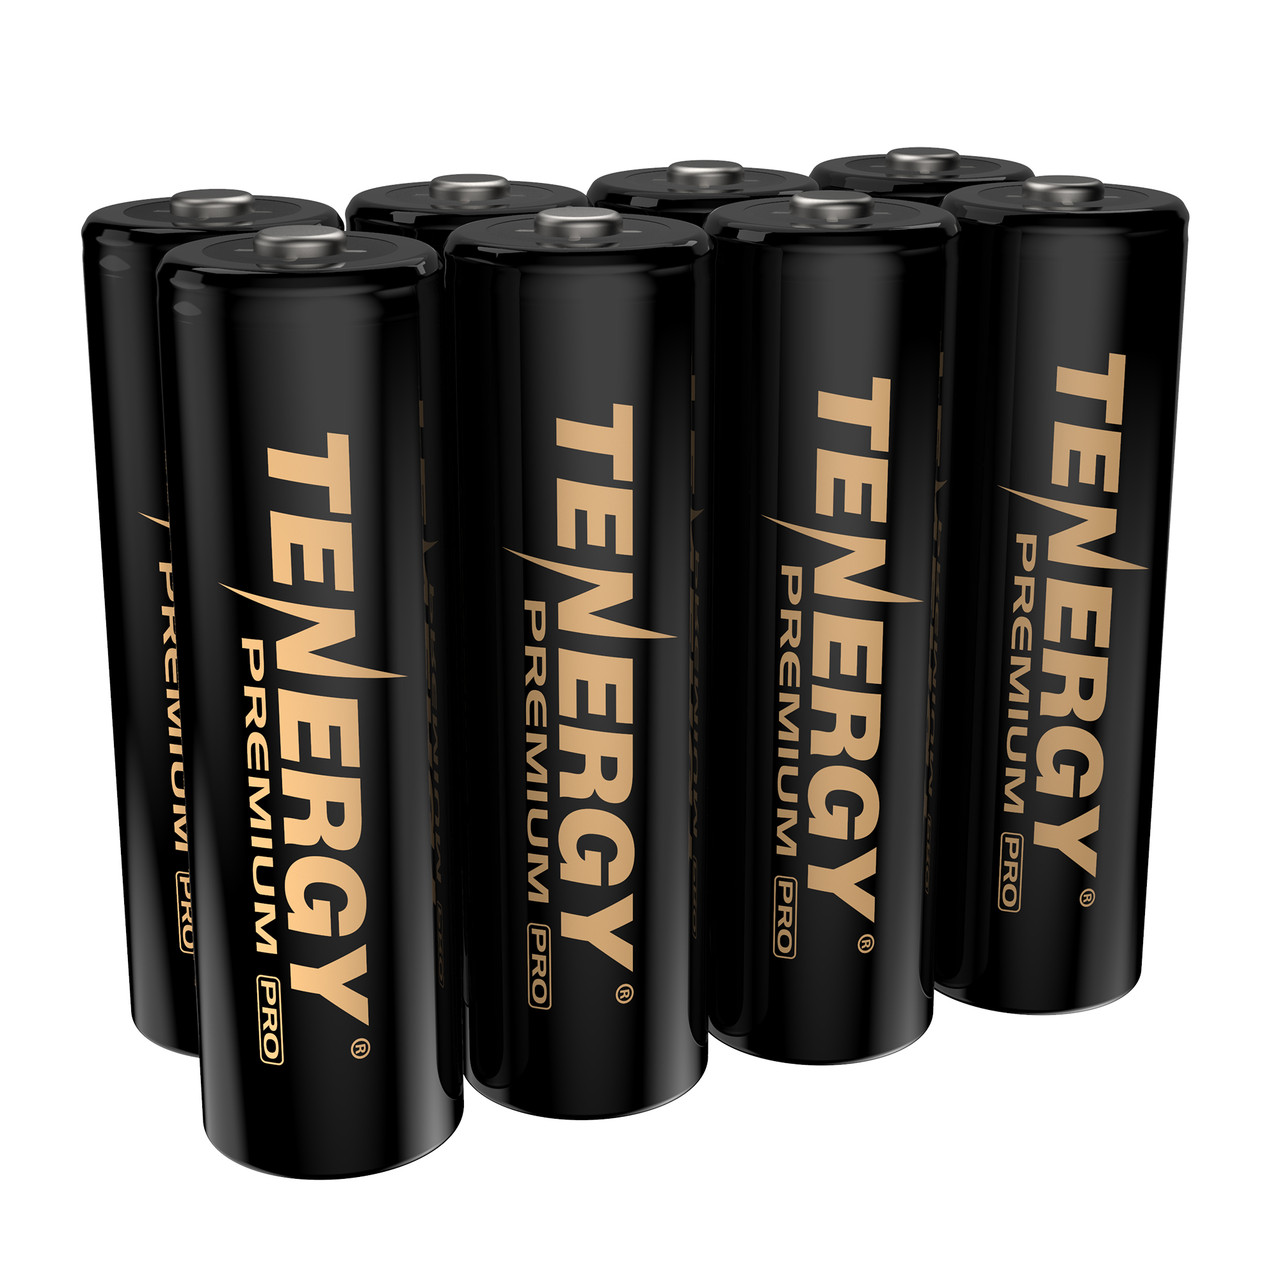 Tenergy Premium PRO Rechargeable AA Batteries, High Capacity Low Self-Discharge 2800mAh NiMH AA Battery, 8 Pack